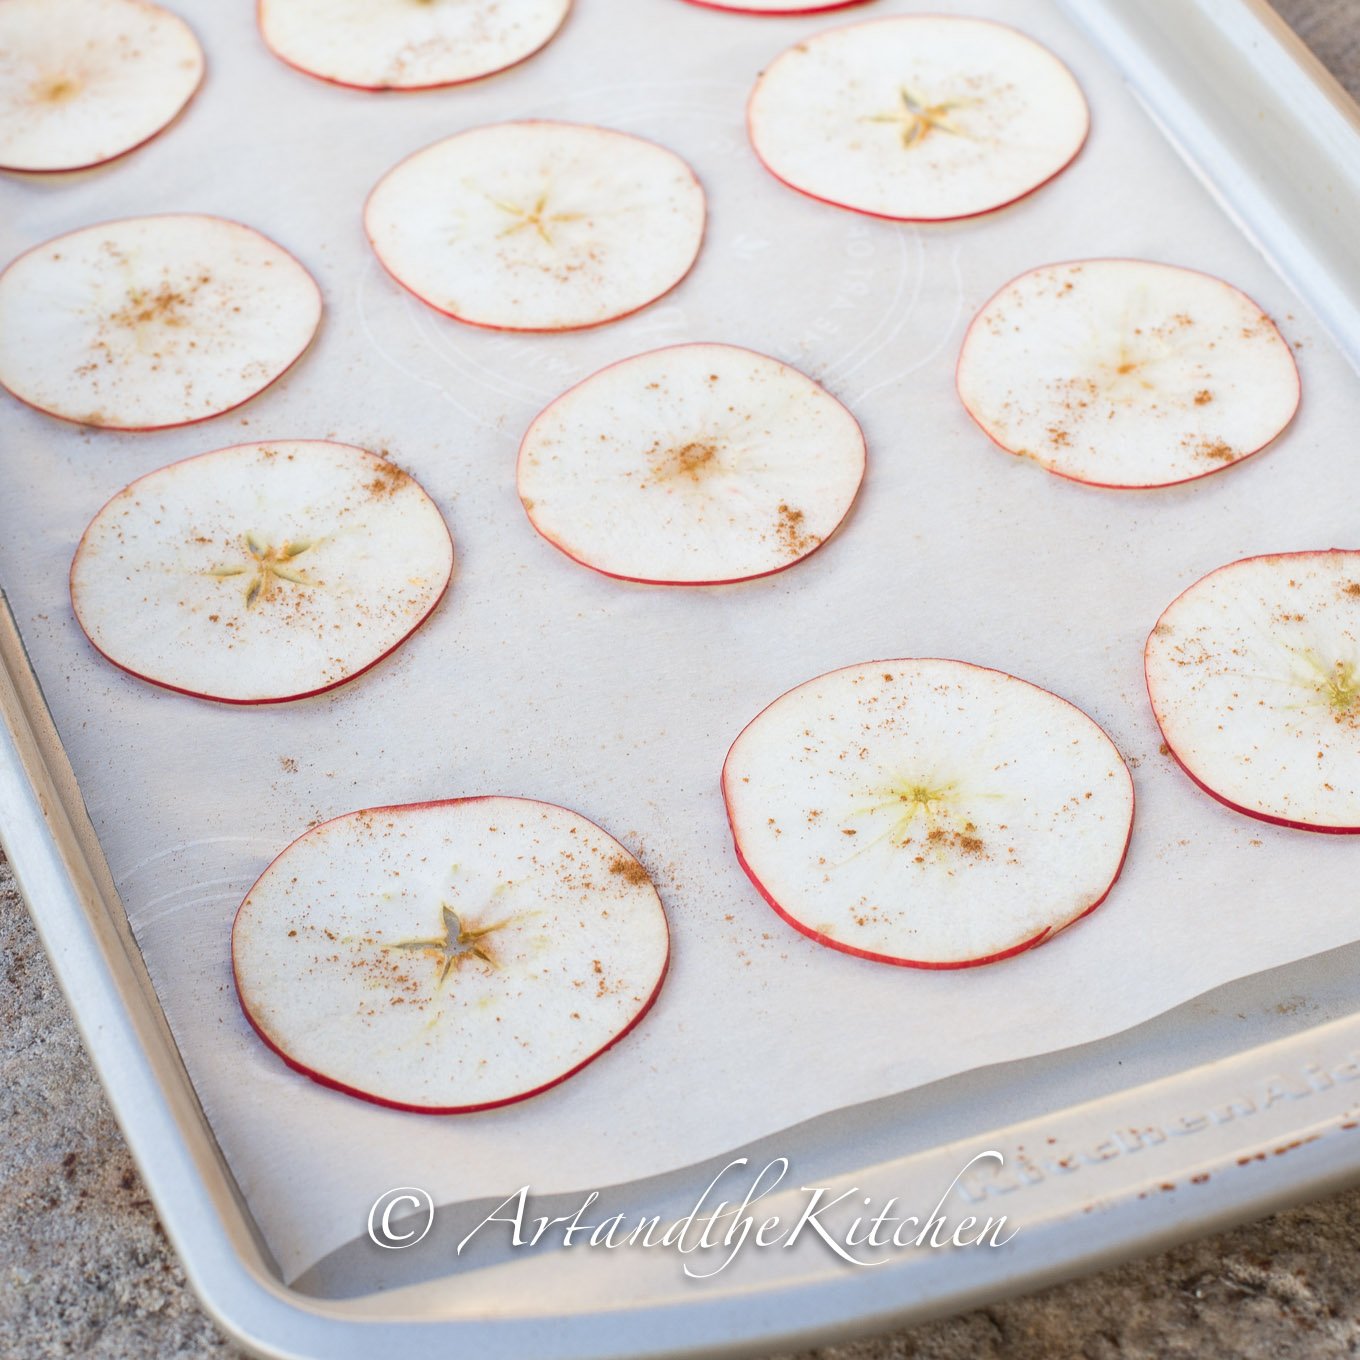 Place apple slices on parchment lined baking sheet